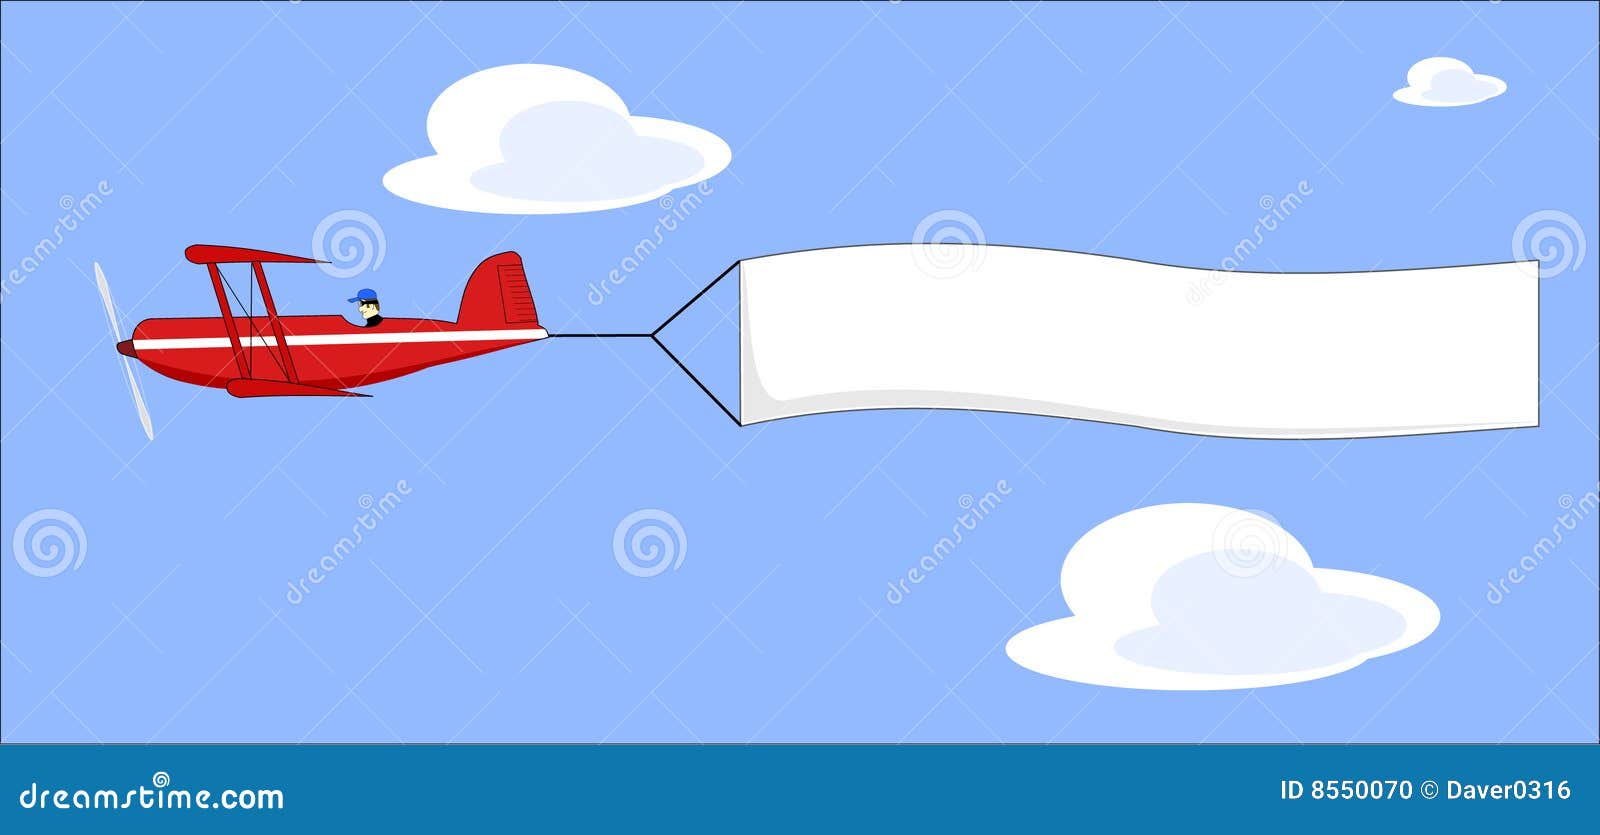 Plane Pulling Banner Vector Stock Photo - Image: 8550070